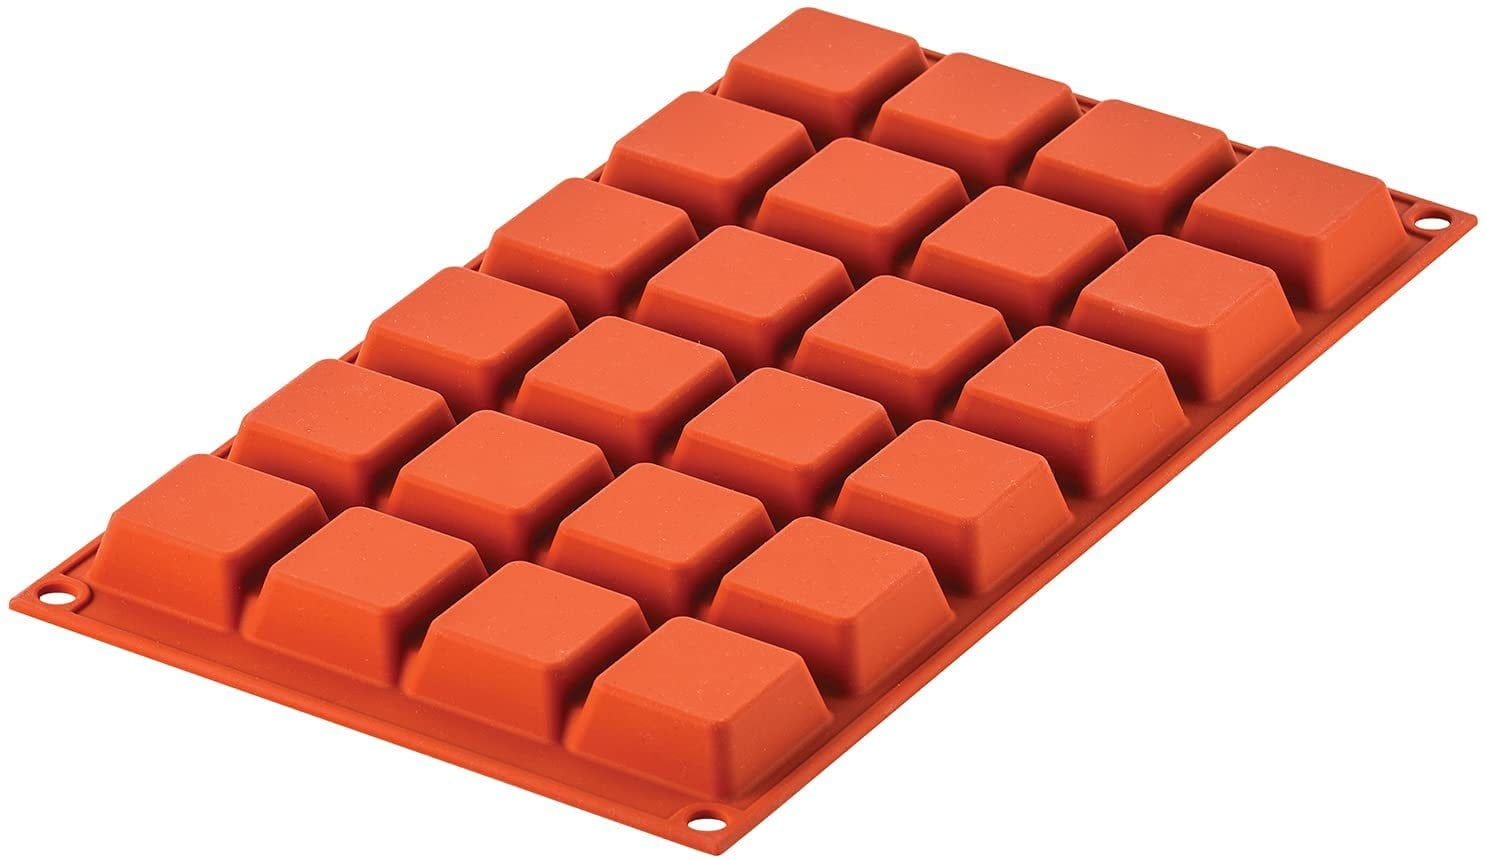 Details about   Silicone Brownie Mold Set Of 2 15 Cavities 1.5 Inch Squares Cake Baking Pan 